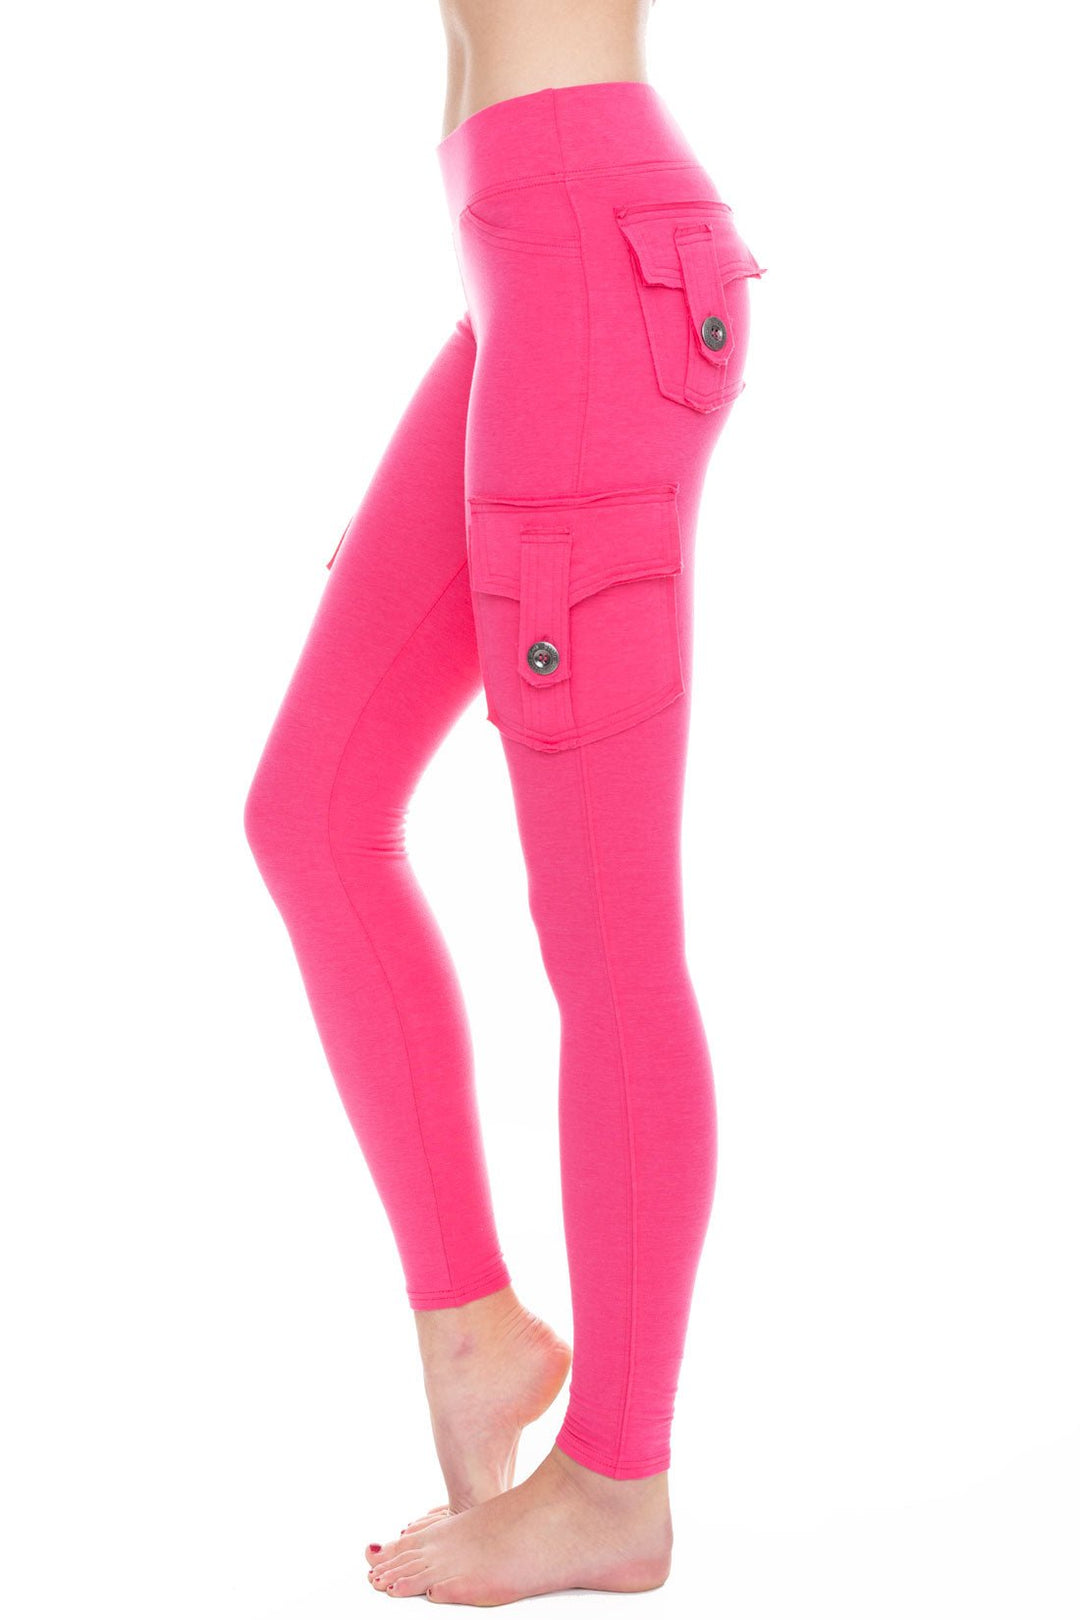 Women's Organic Cotton Pants and Leggings, Sustainable and Ethically Made